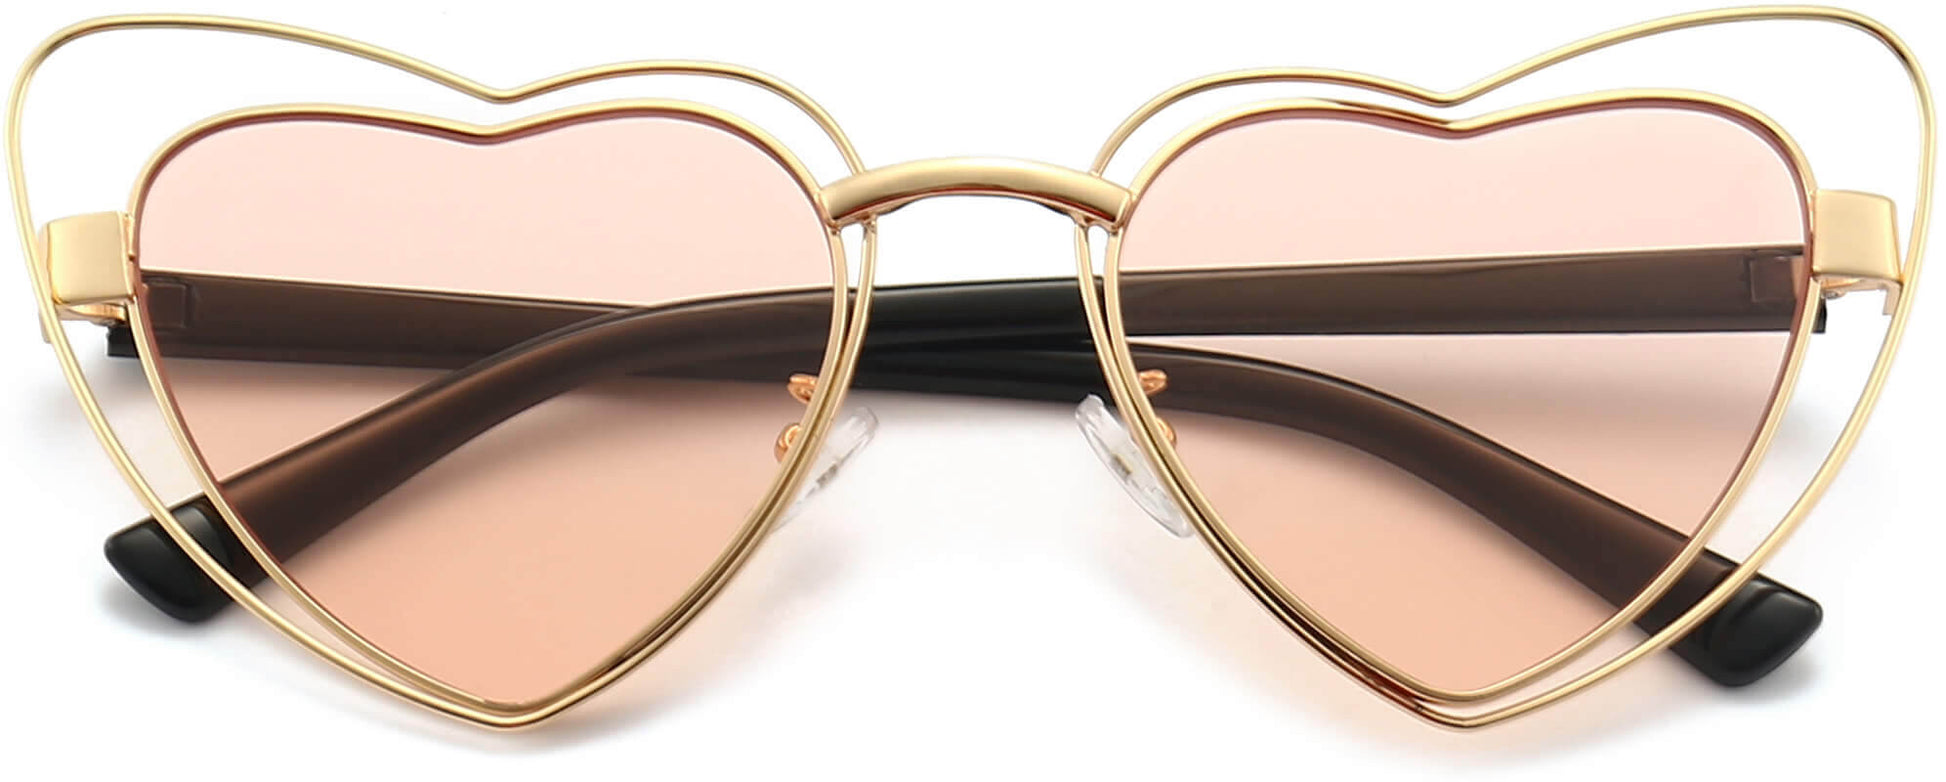 Eloise Gold Stainless steel Sunglasses from ANRRI, closed view